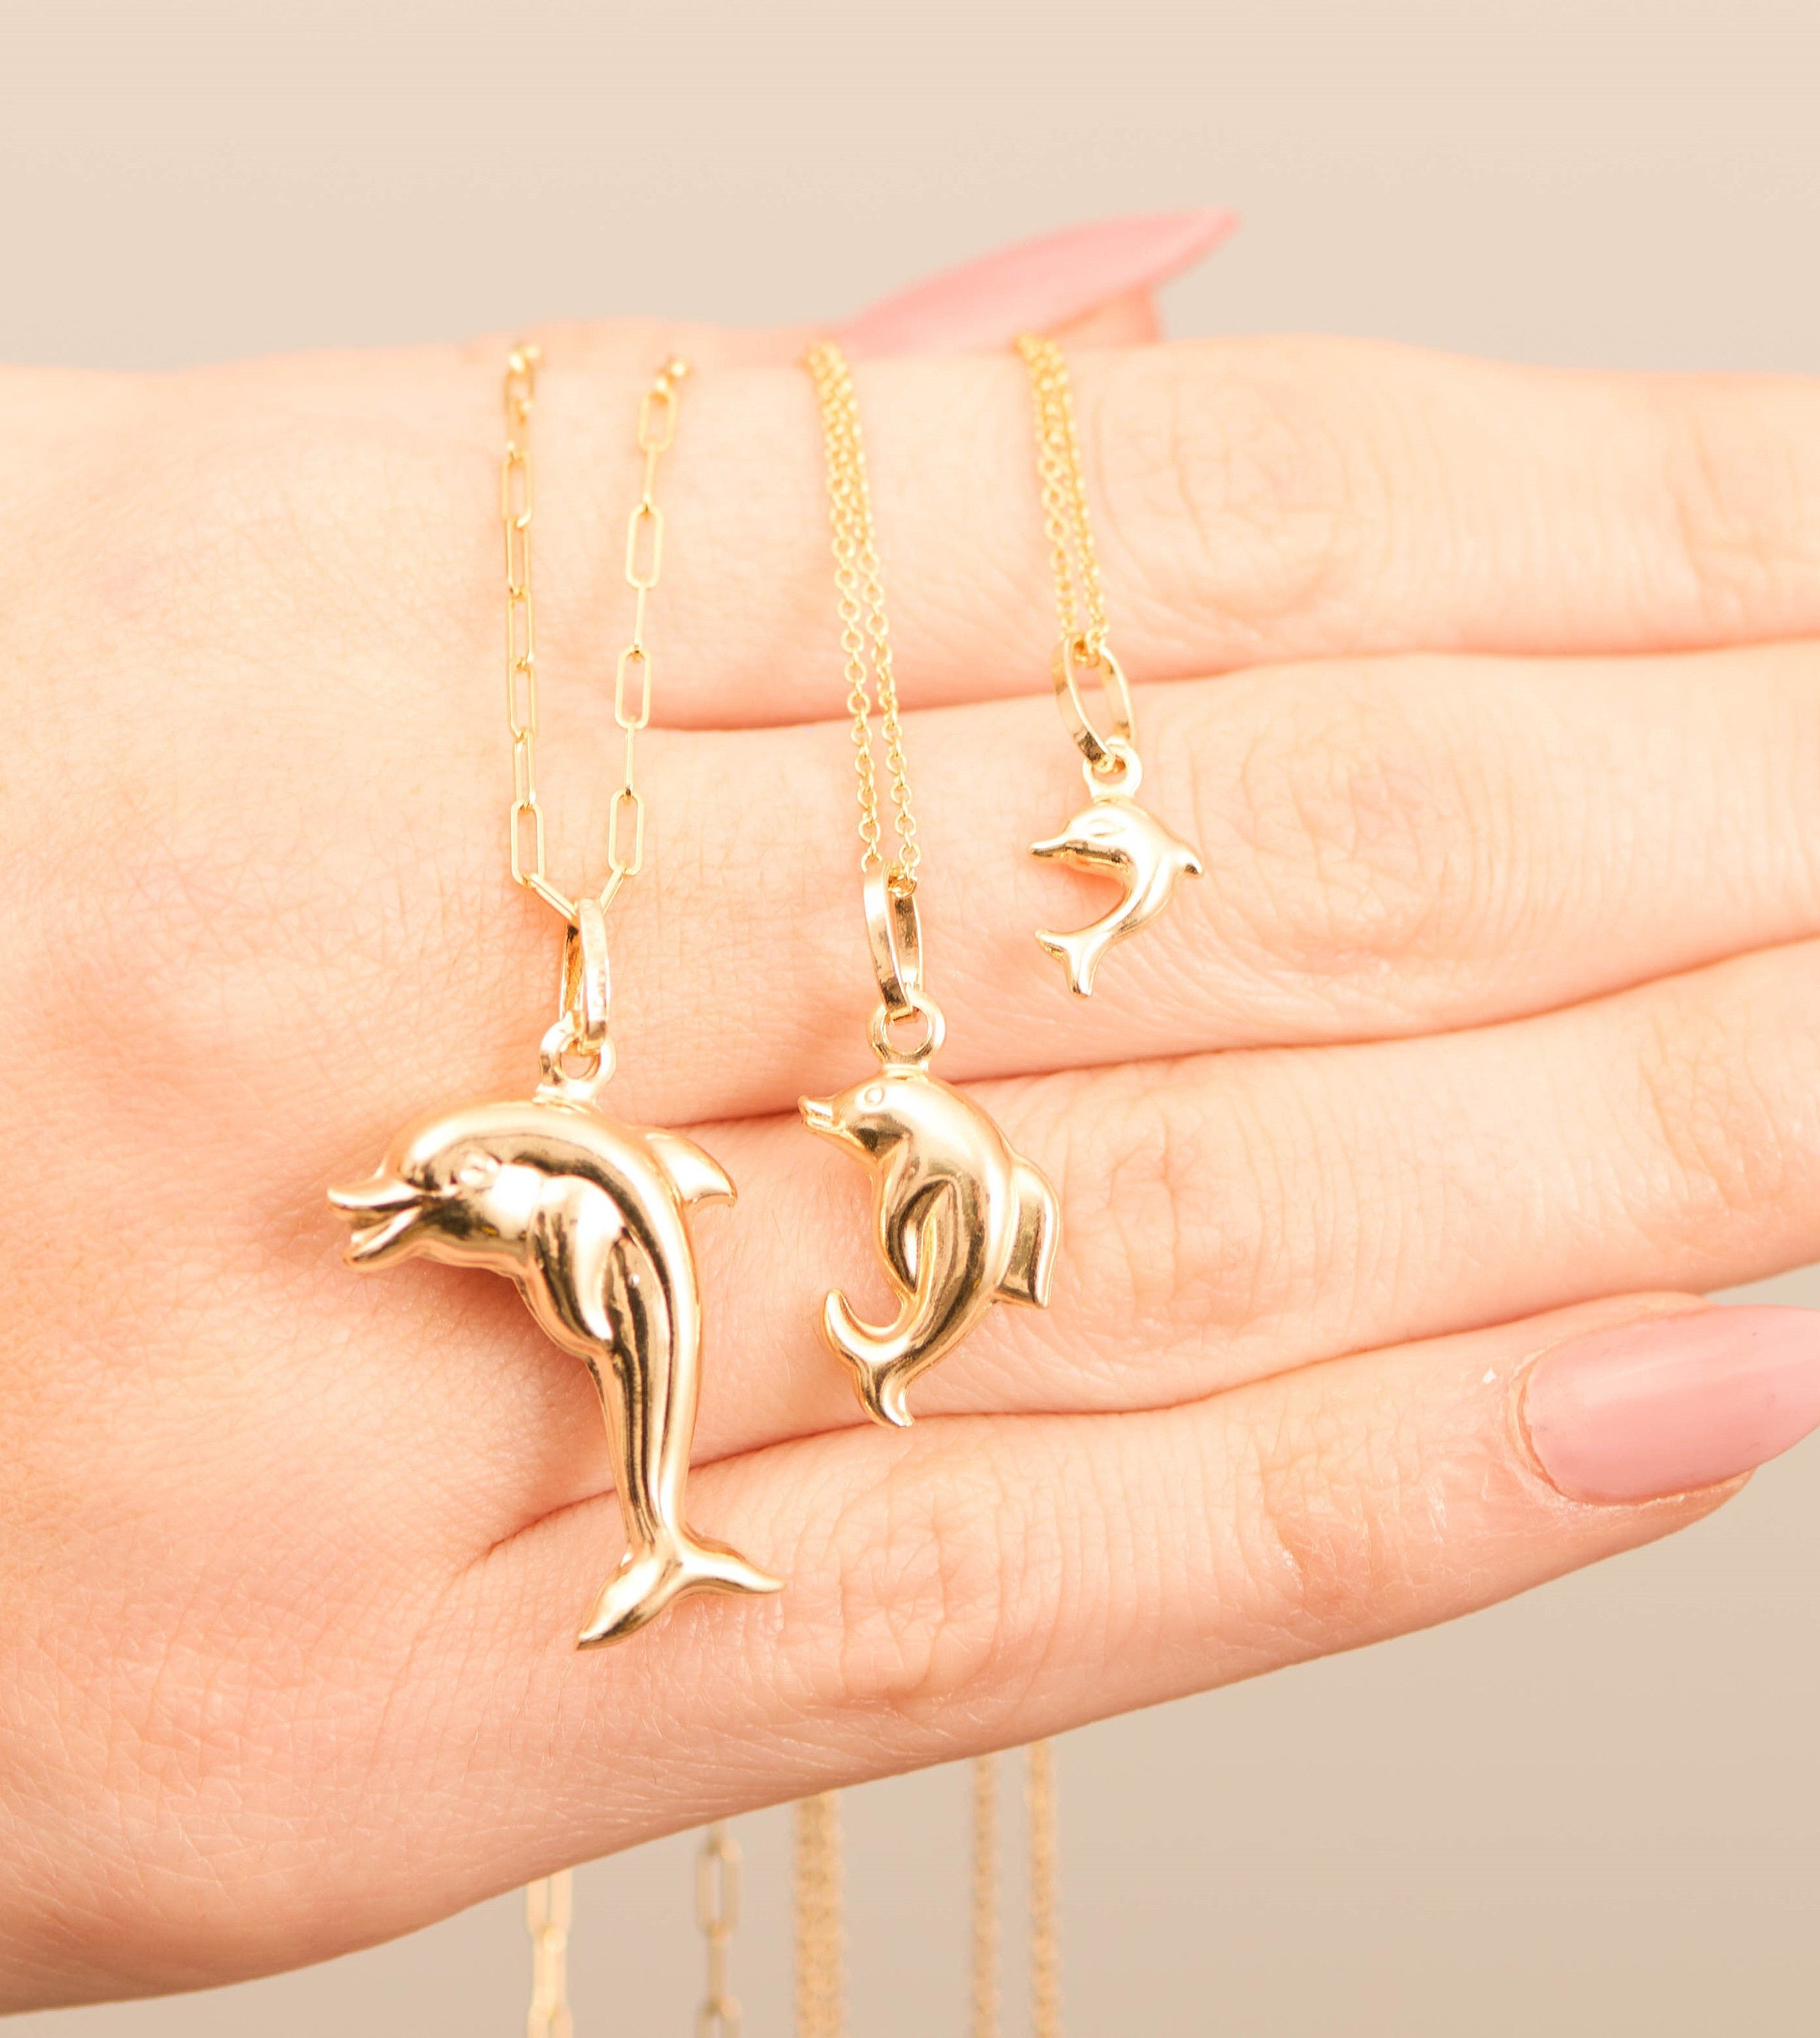 SOLID 18k YELLOW GOLD DOLPHIN CHARM PENDANT CUTE ESTATE JEWELRY GIFT  NECKLACE